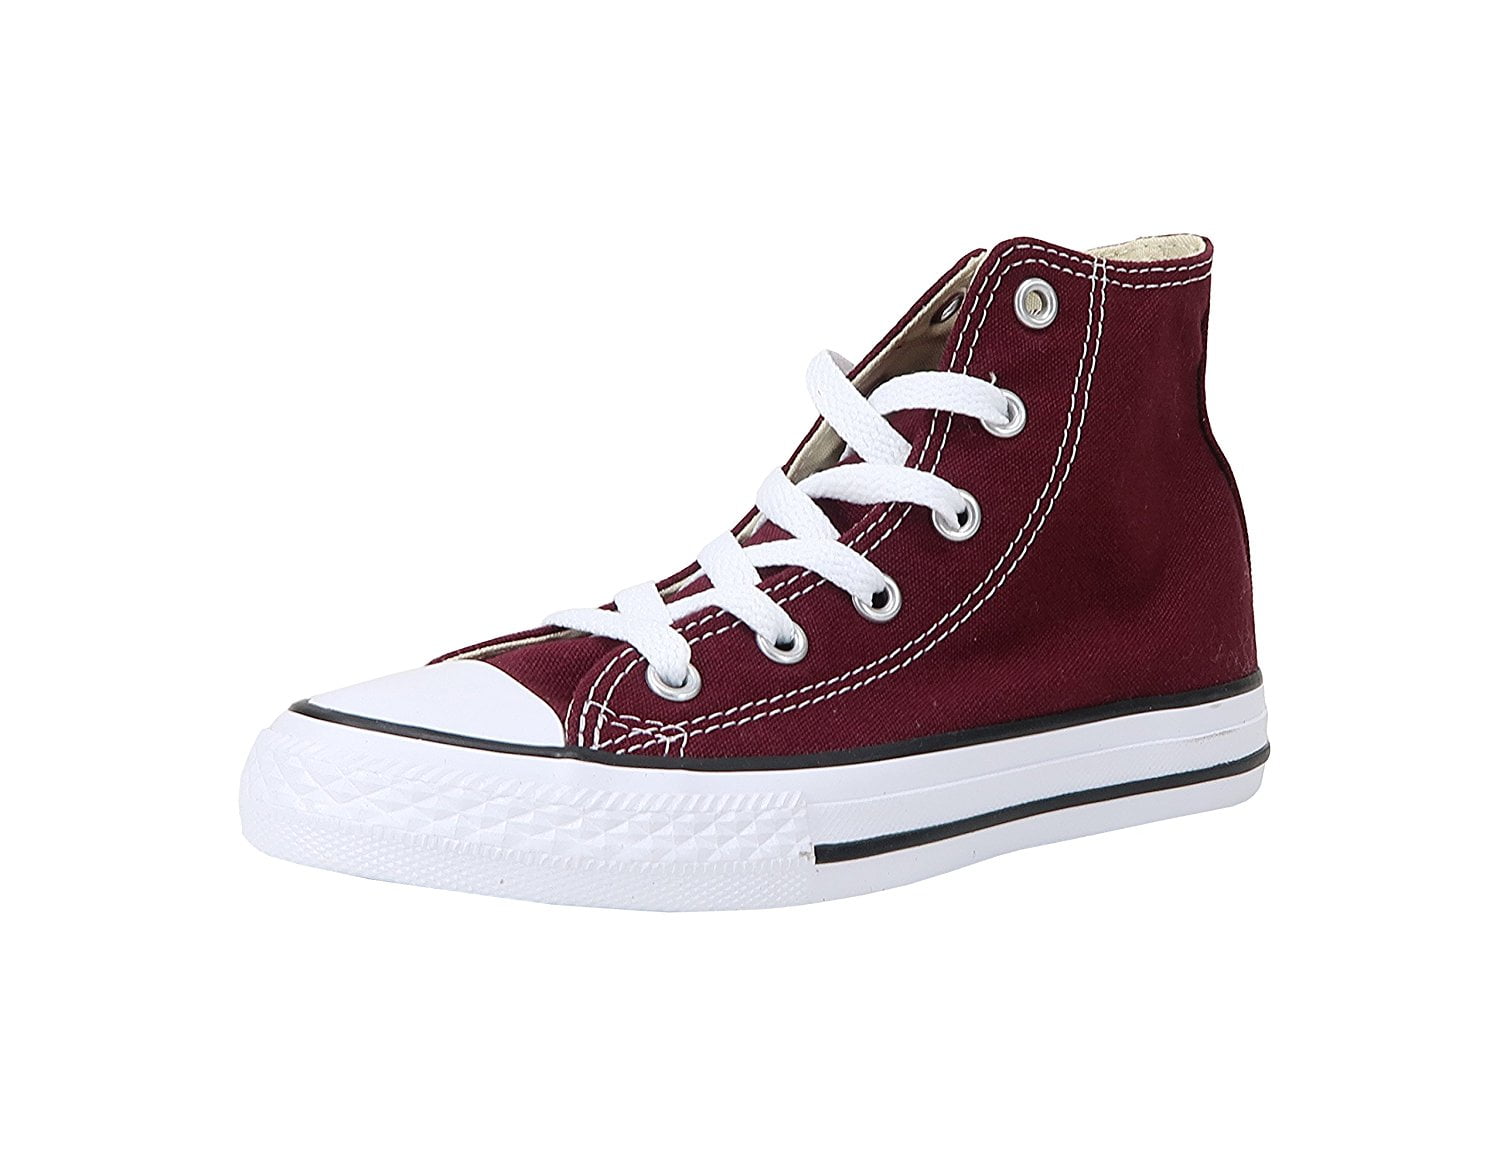 Converse Chuck Taylor All Star Ox Burgundy & White Shoes | Sneakers  fashion, Black converse shoes, Converse shoes